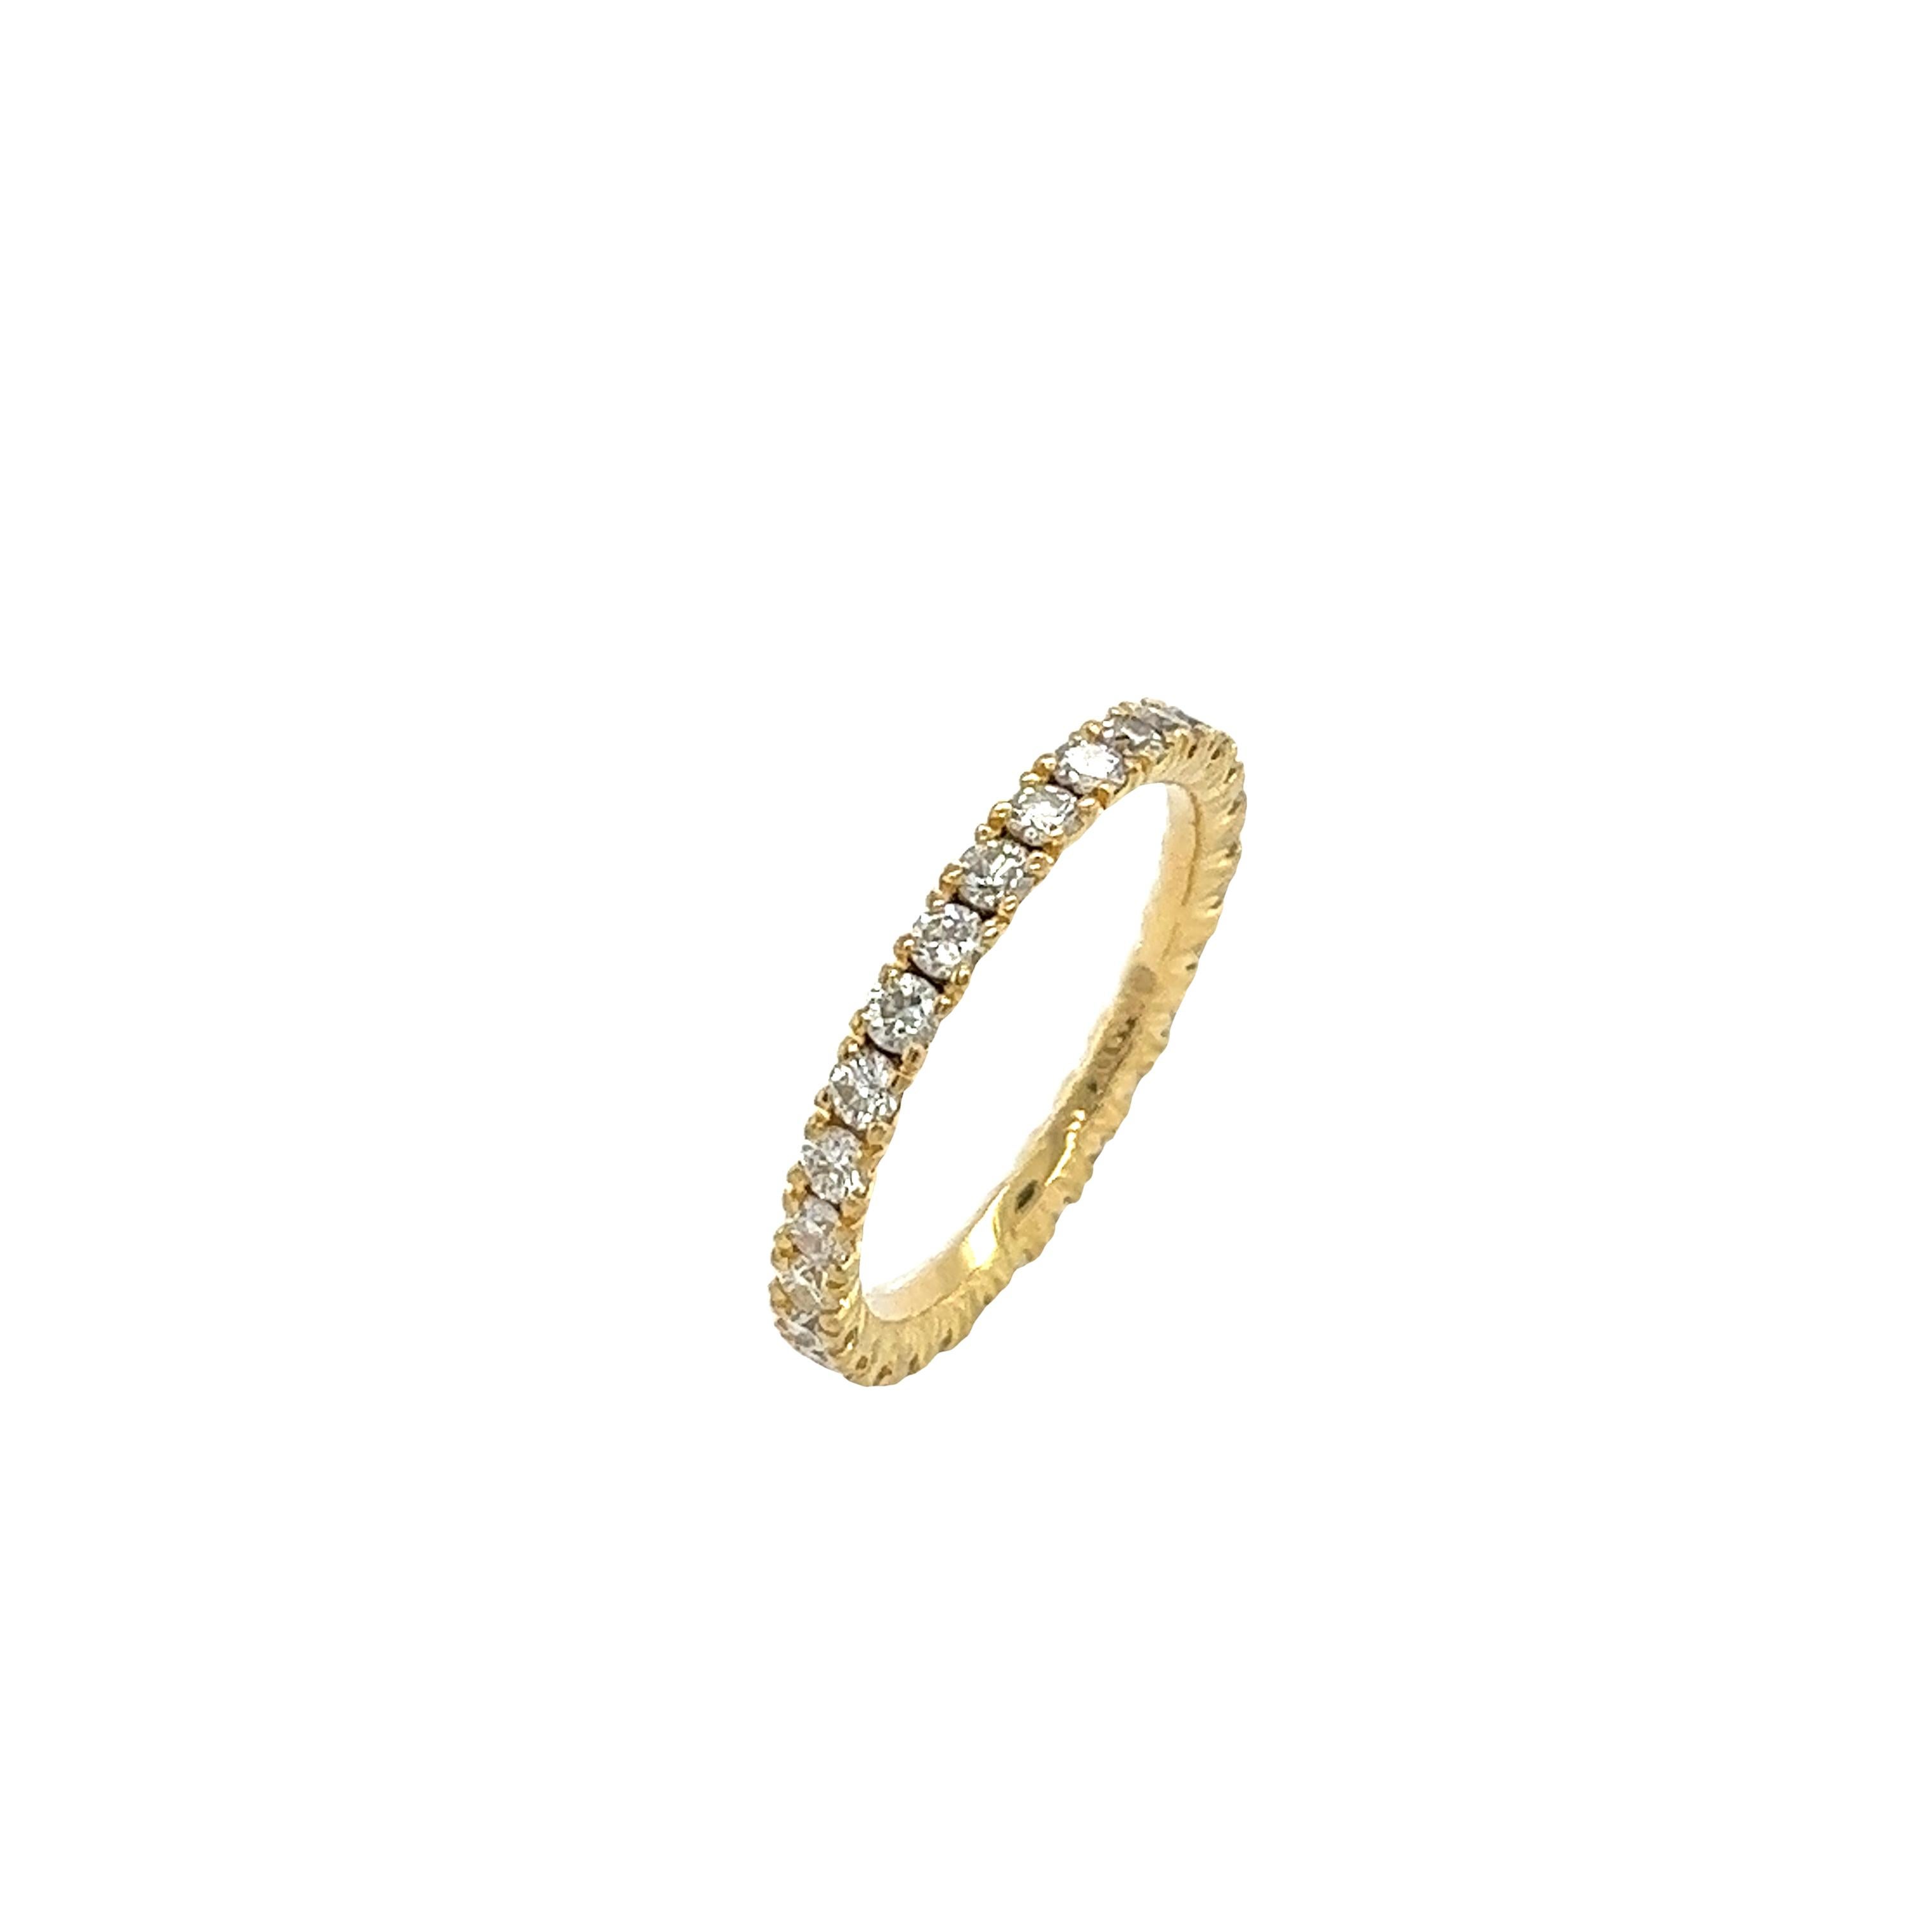 Browns 18ct Yellow Gold Diamond Full Eternity Ring Set With 1.06ct For Sale 1